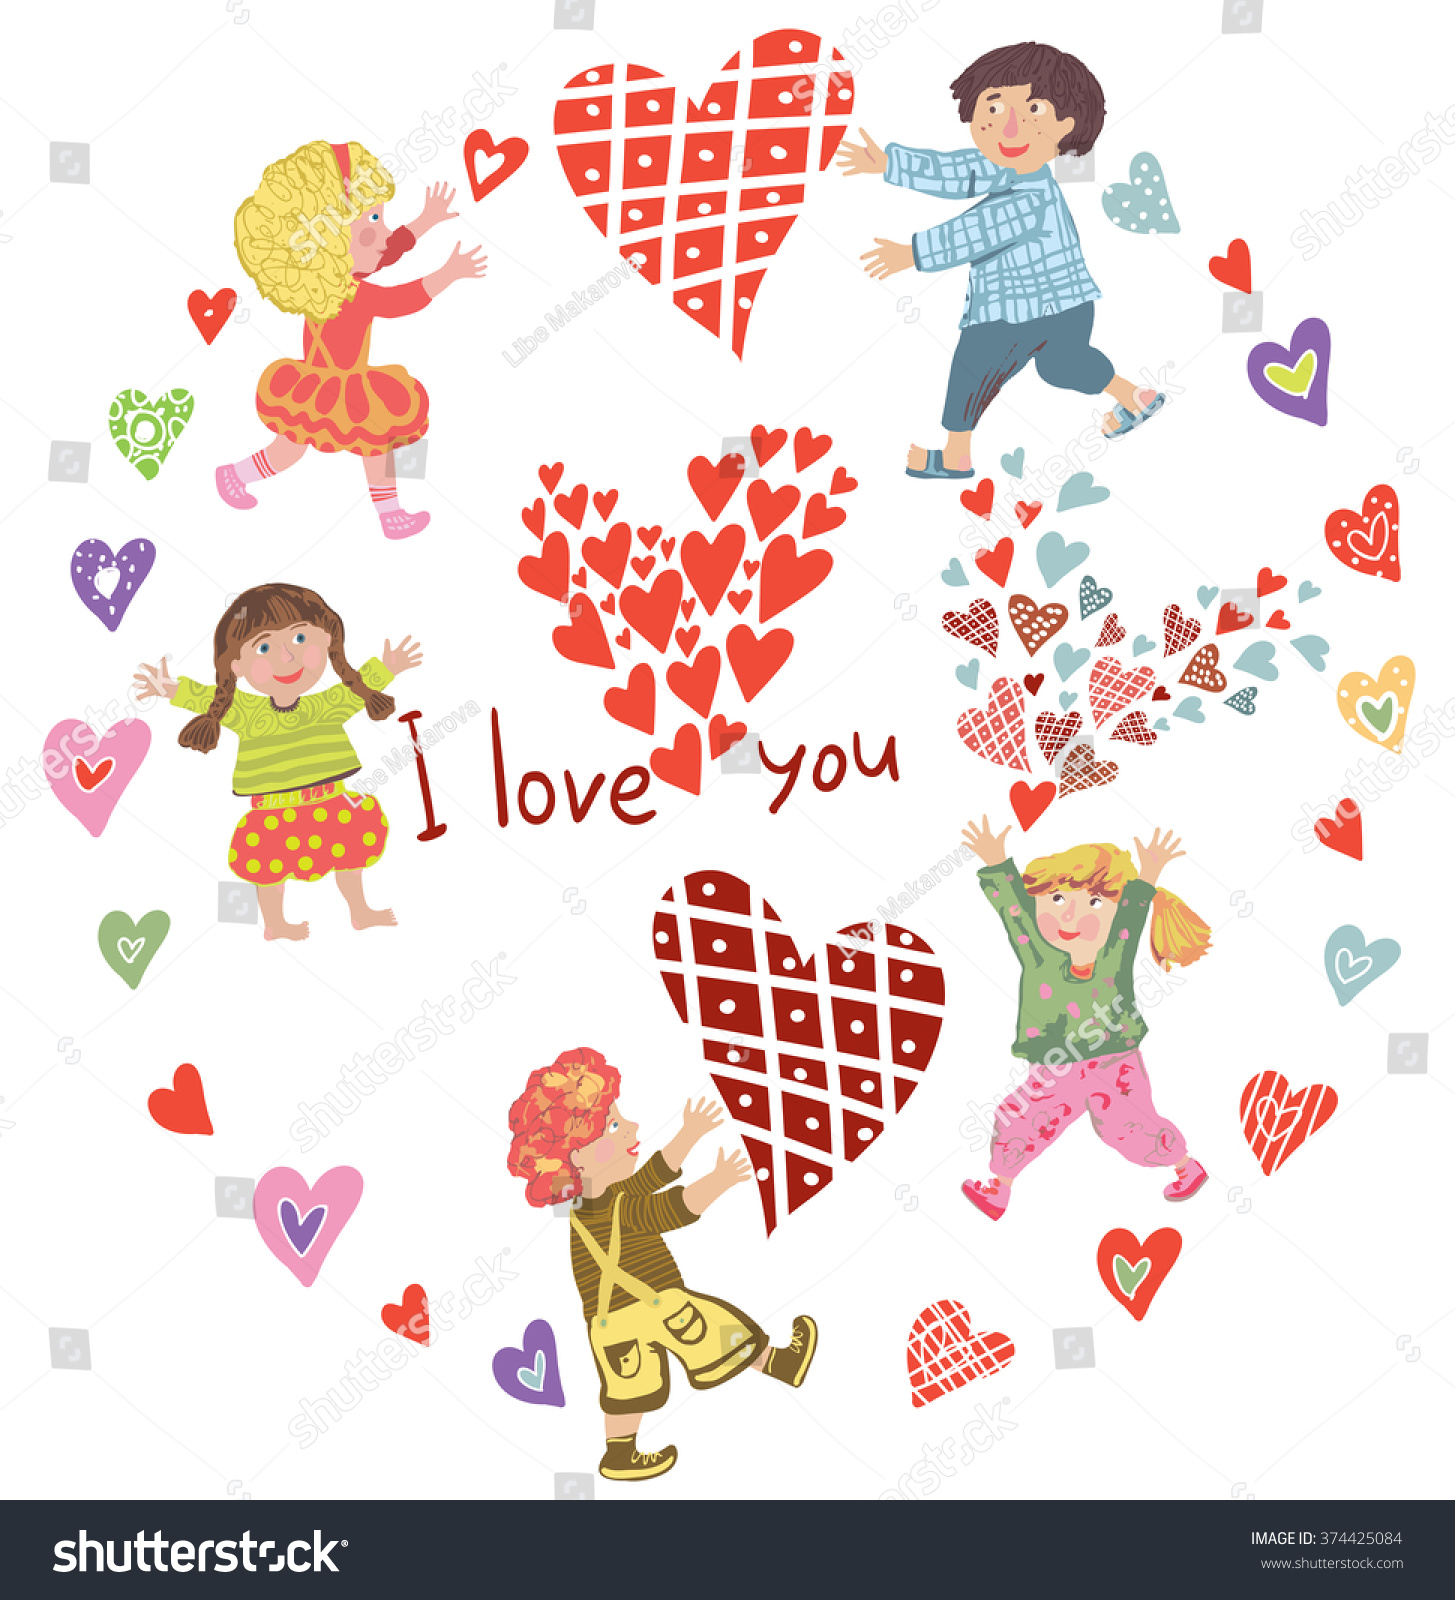 SVG of I love you. Vector, cartoon, colorful illustrations. Little cute girls and boys. They give each other hearts. Decorative greeting card for Mother's Day, Valentine's Day, birthday. svg